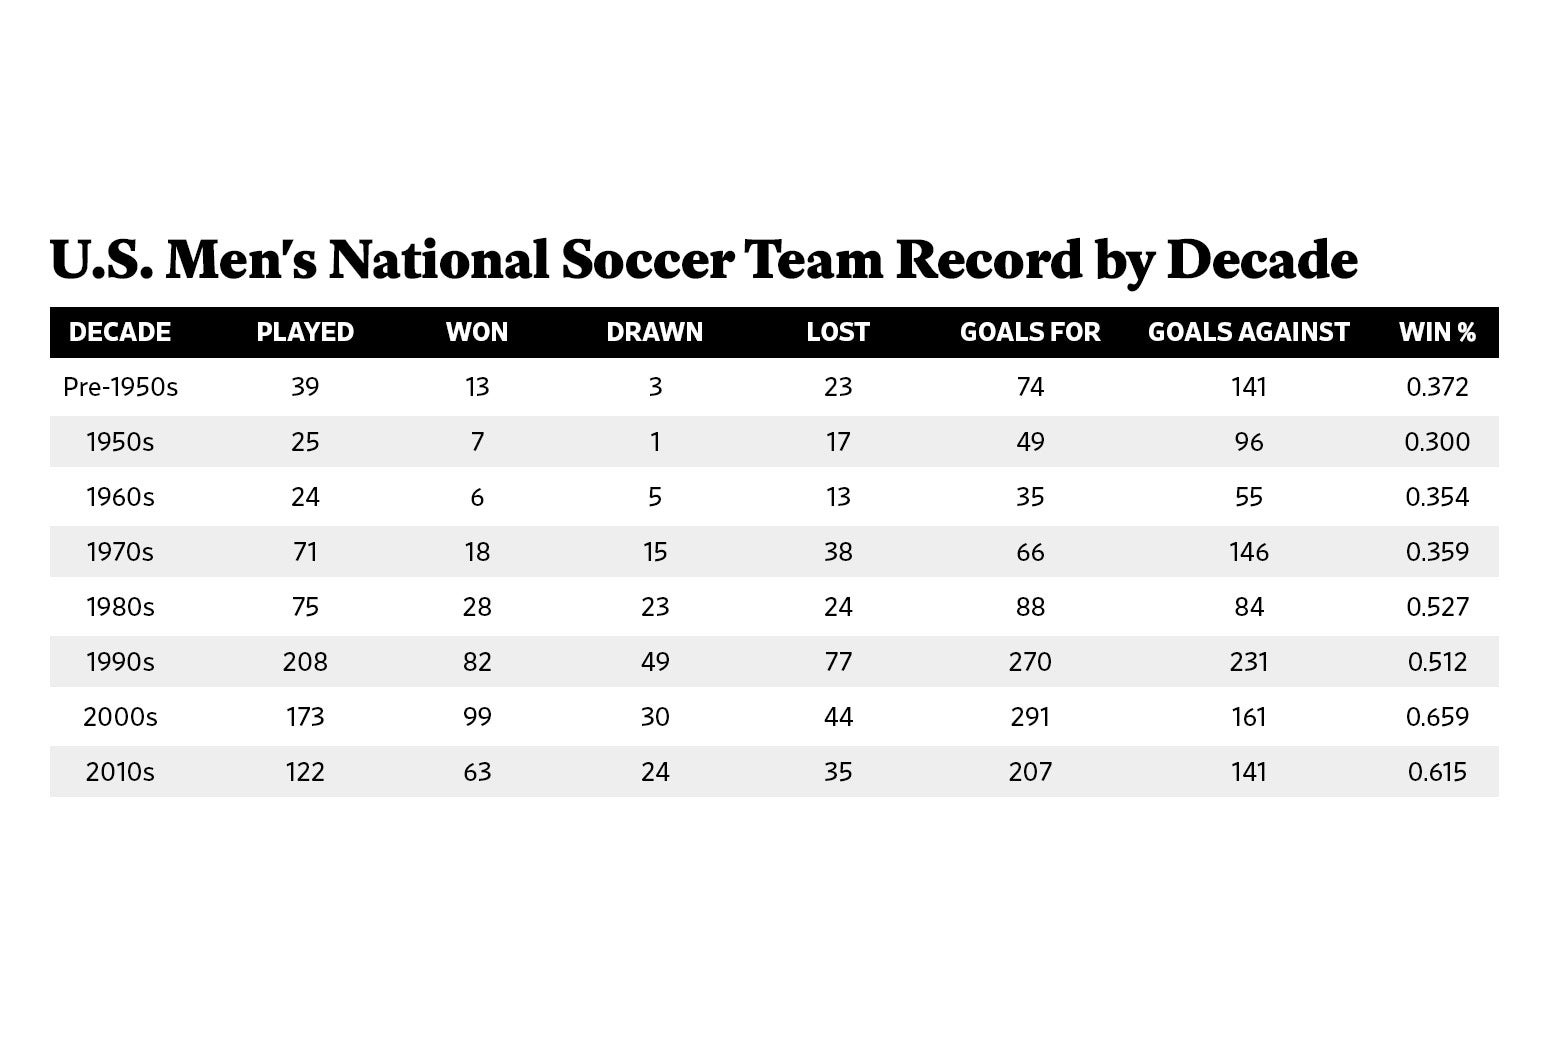 Chart: U.S. Men's National Soccer Team Record by Decade